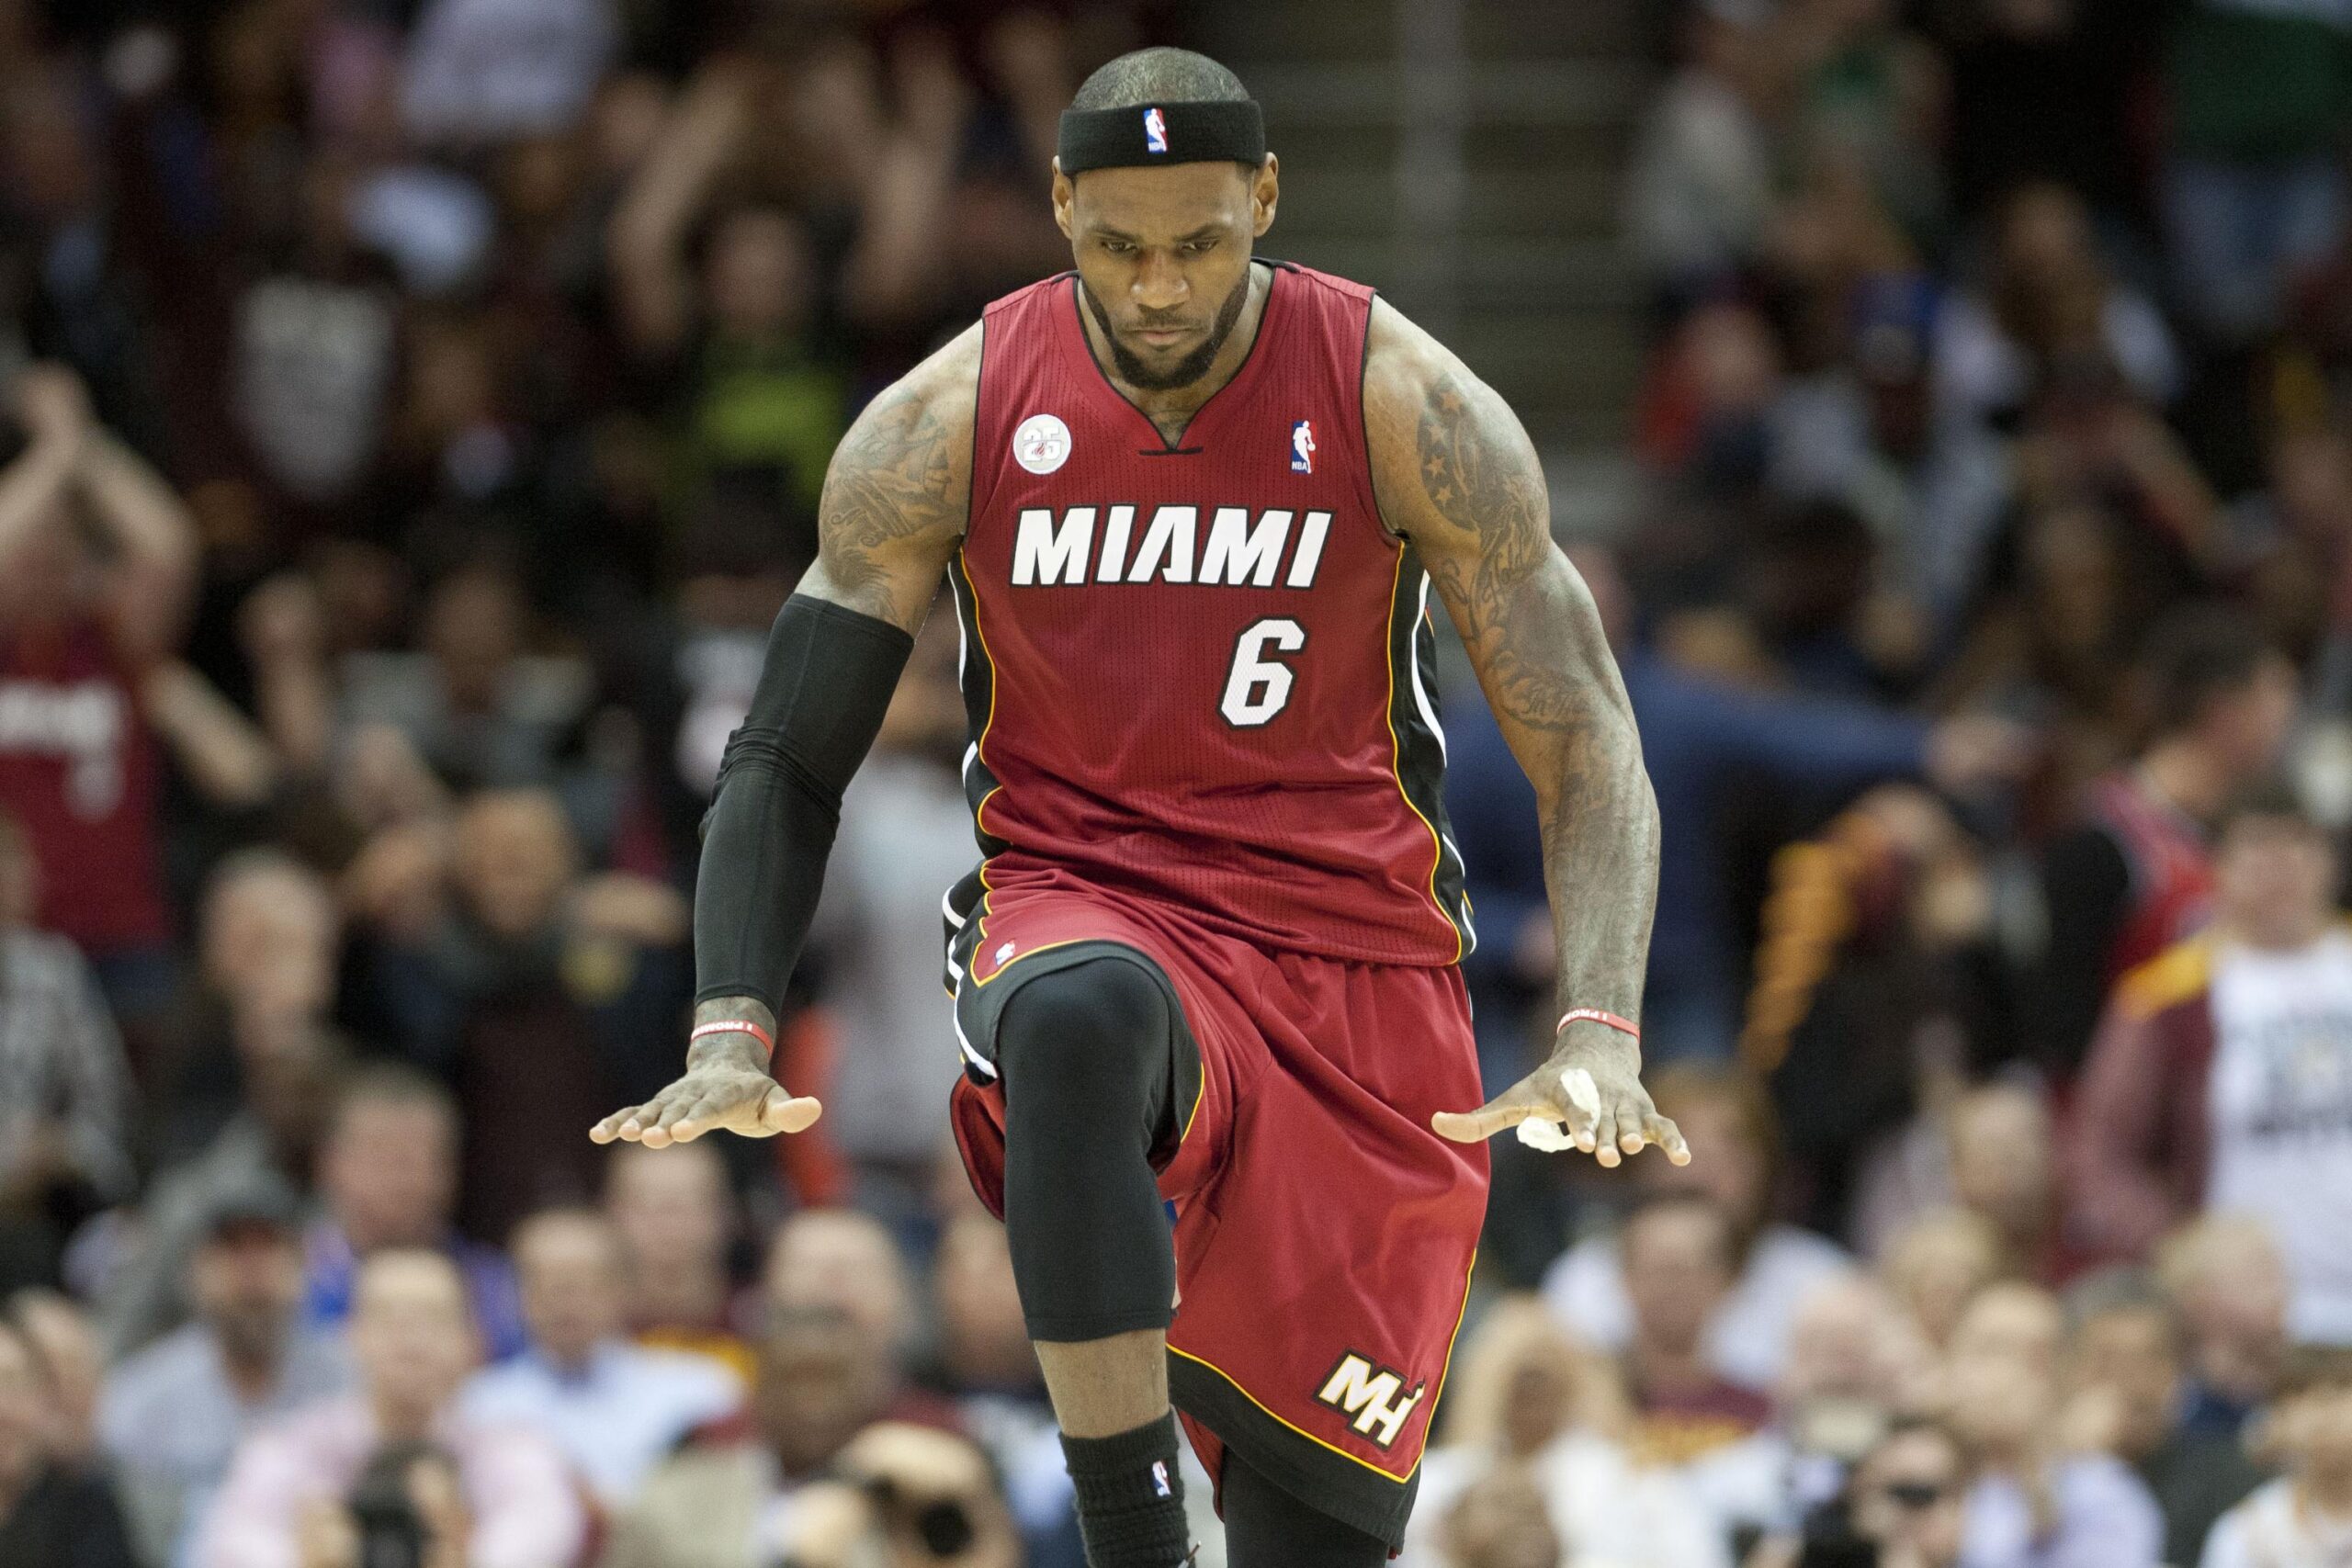 NBA News: Why was LeBron James Jersey No. 6? What Number will he wear in the 2023-2024 season?